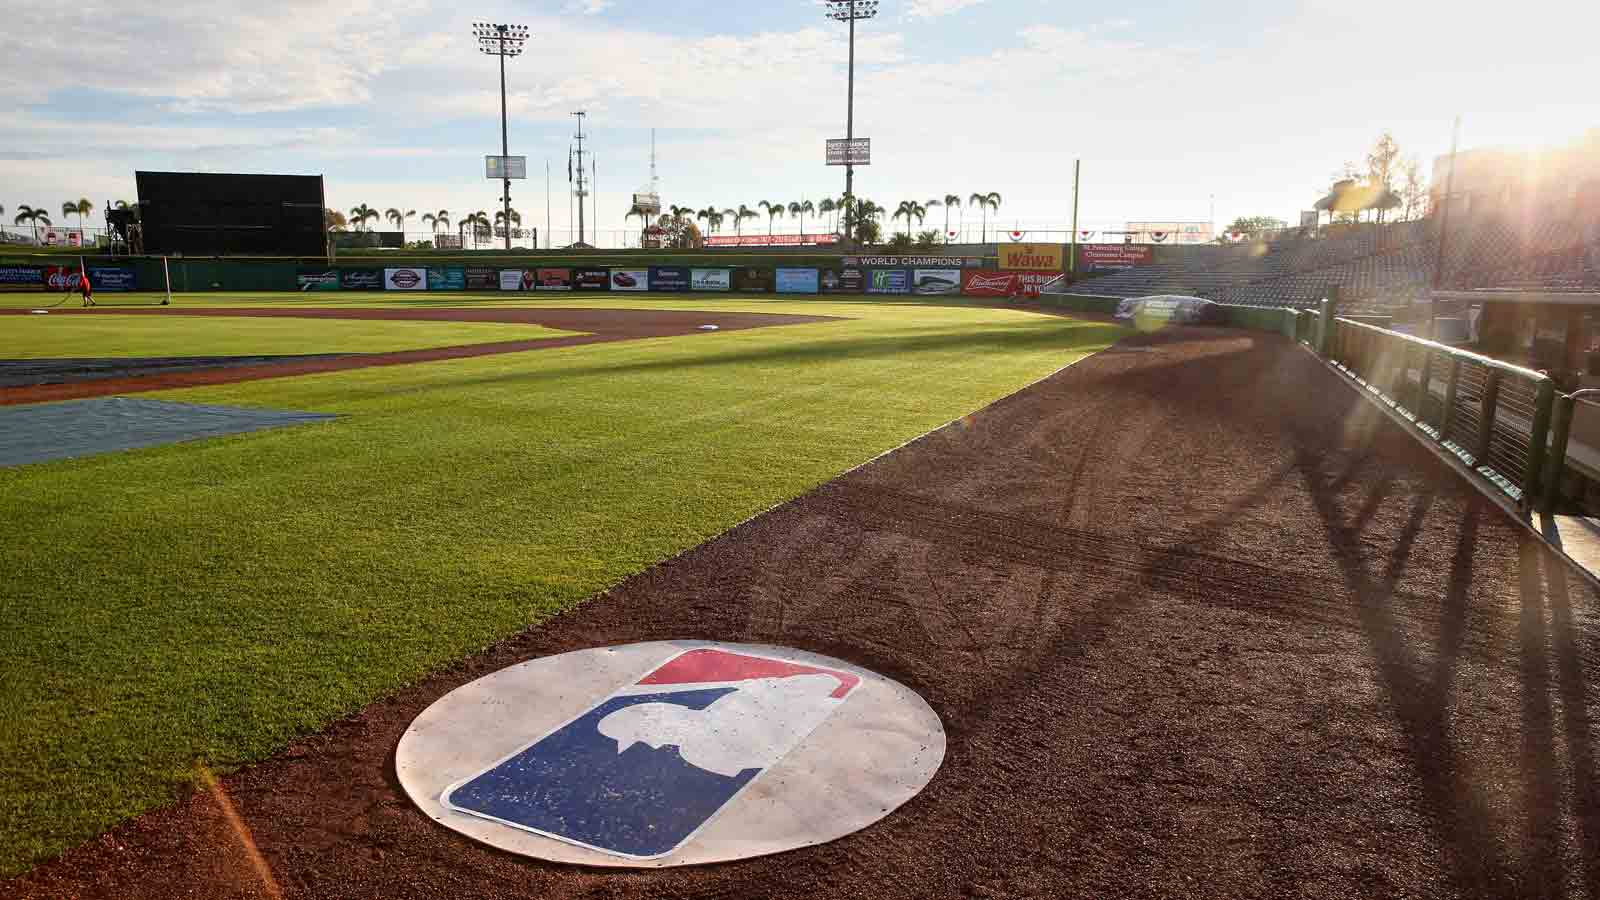 Red Sox announce important Spring Training dates and a WBC